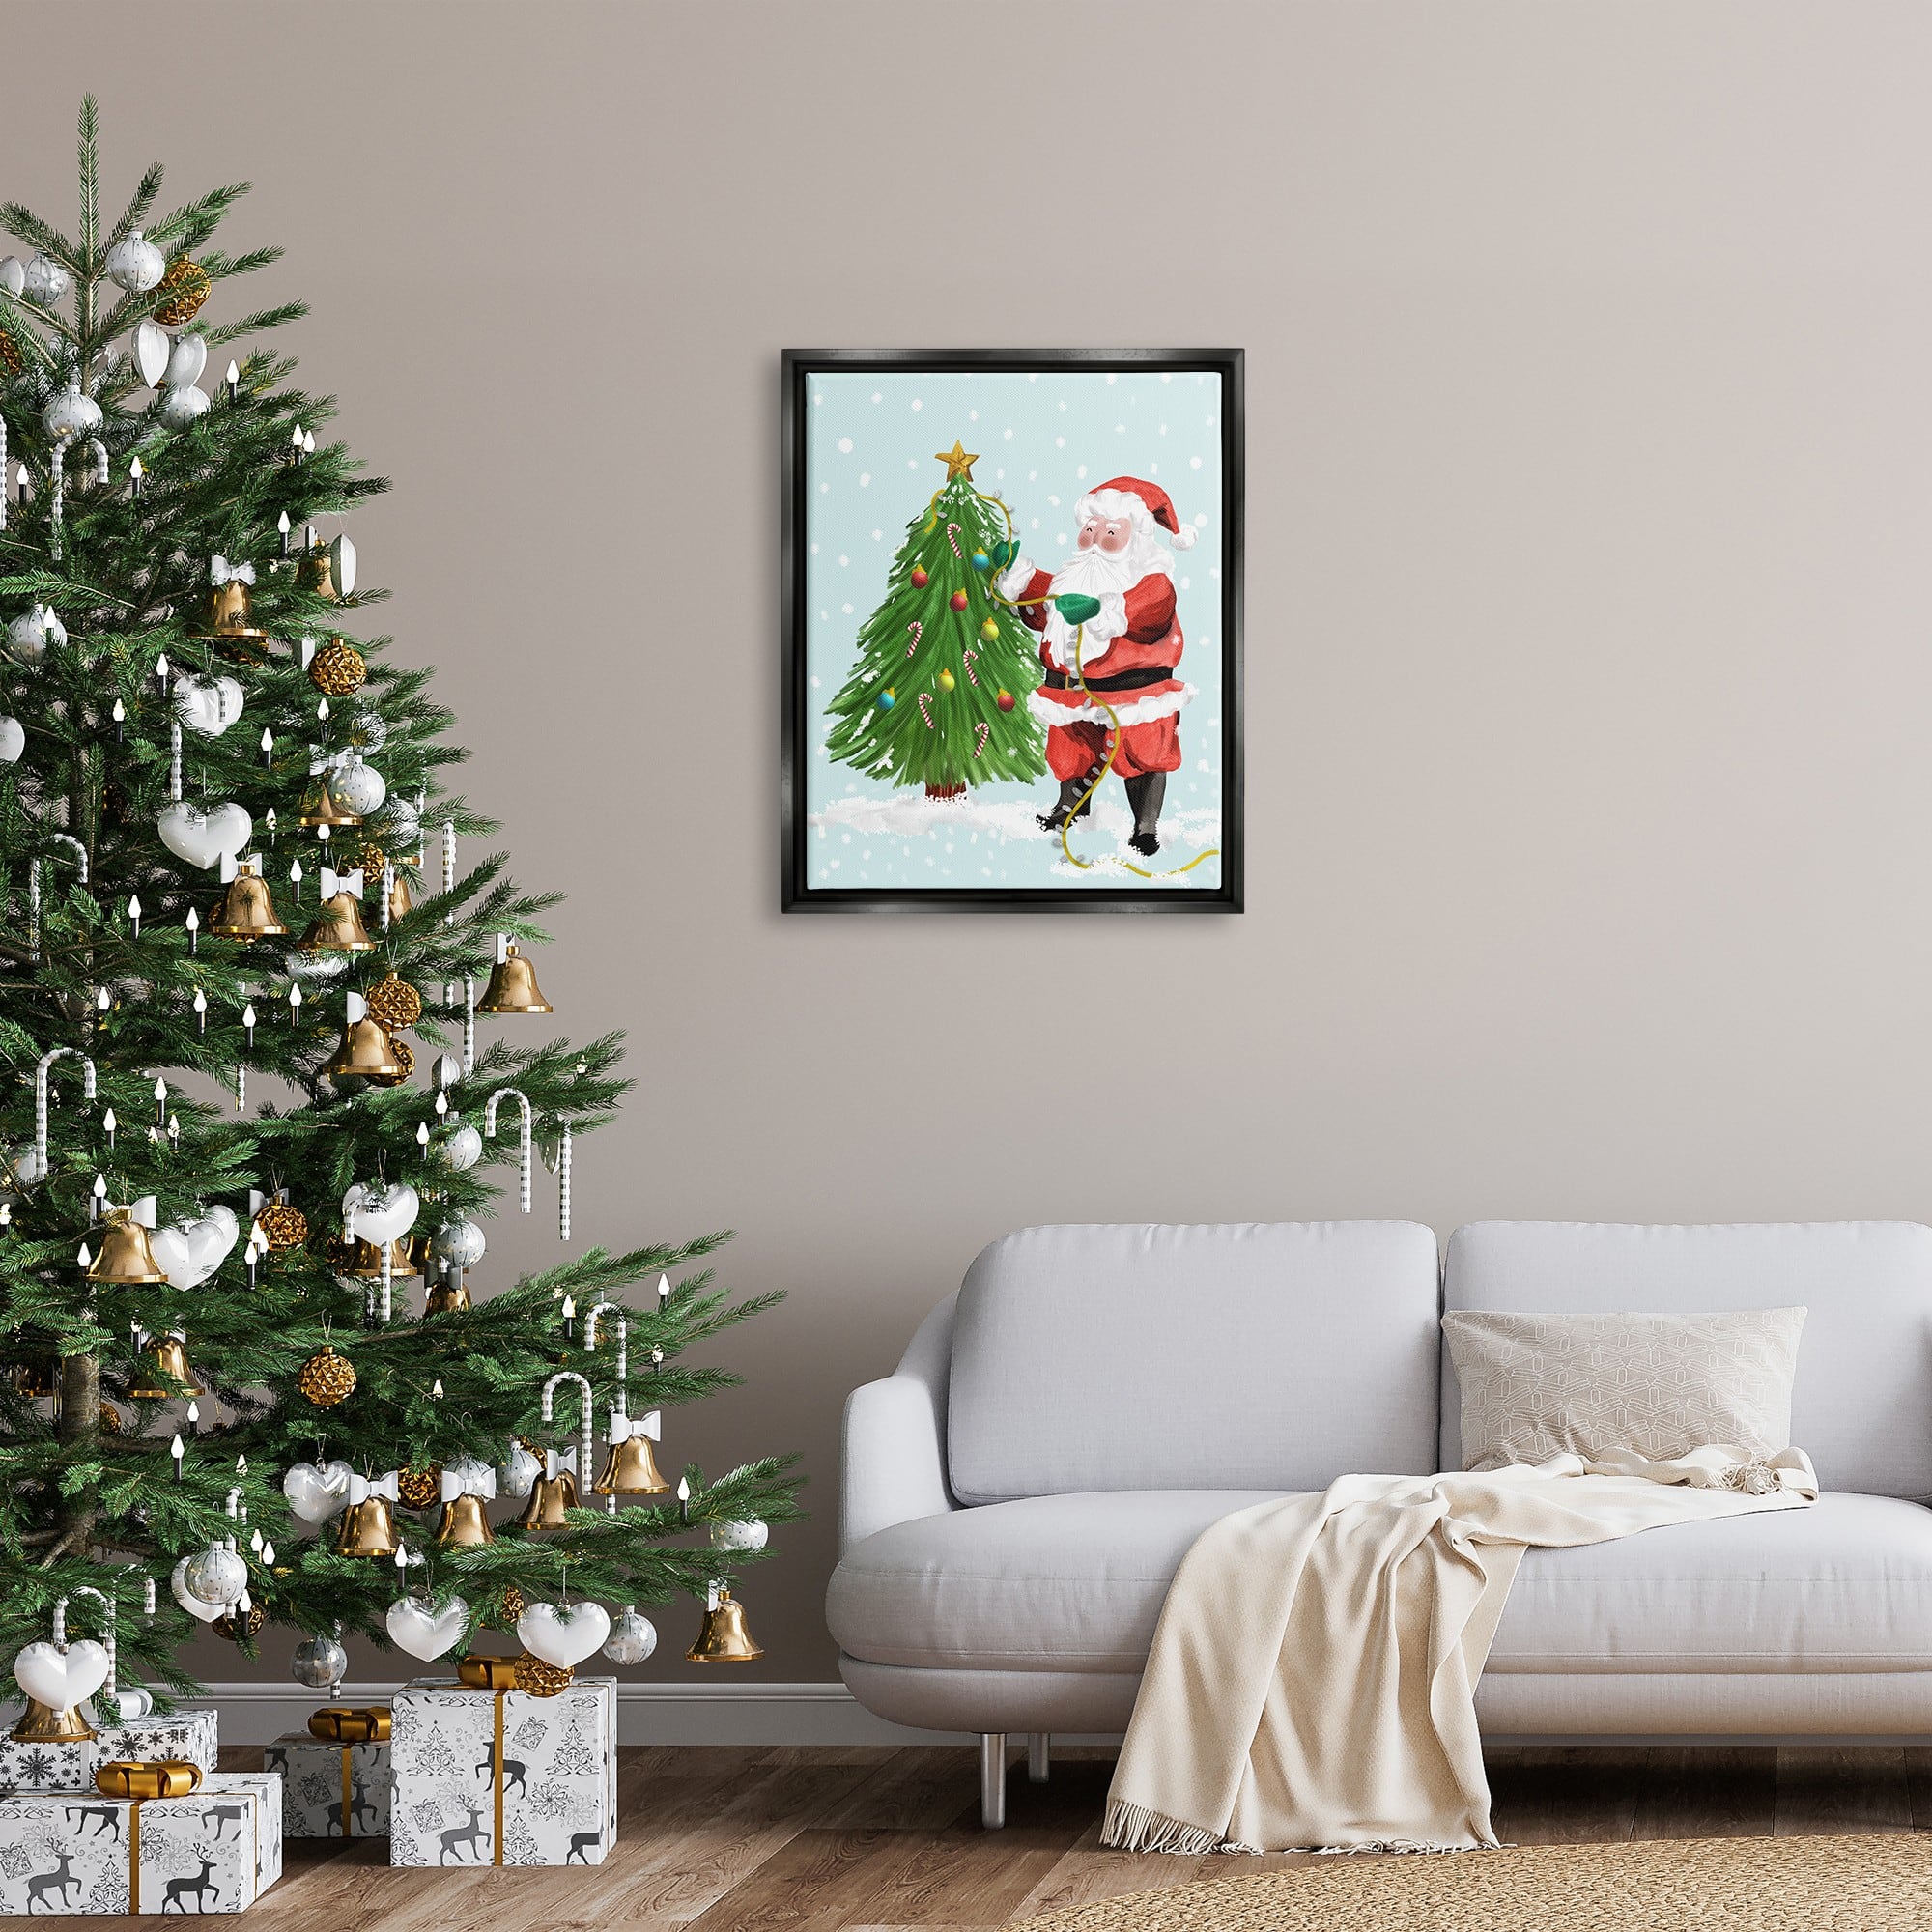 Stupell Industries Snowy Santa Claus Tree Scenery Framed Floater Canvas Wall Art